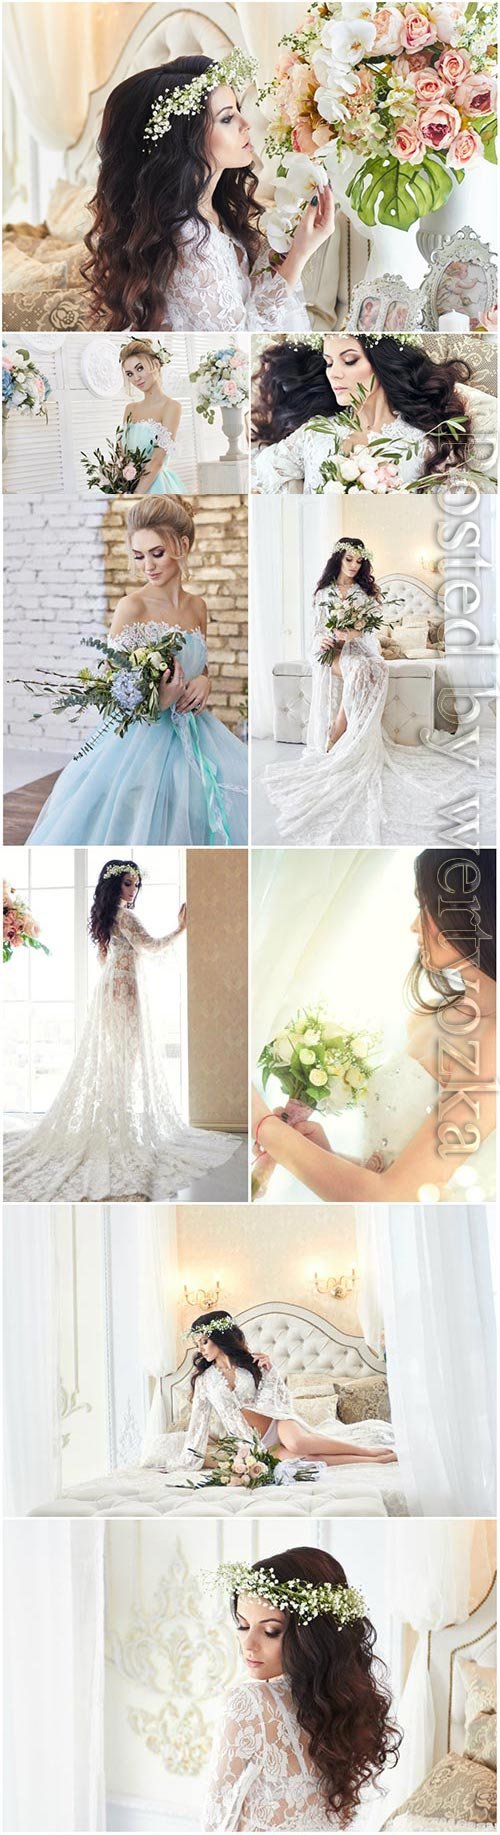 Brides with wedding bouquets stock photo